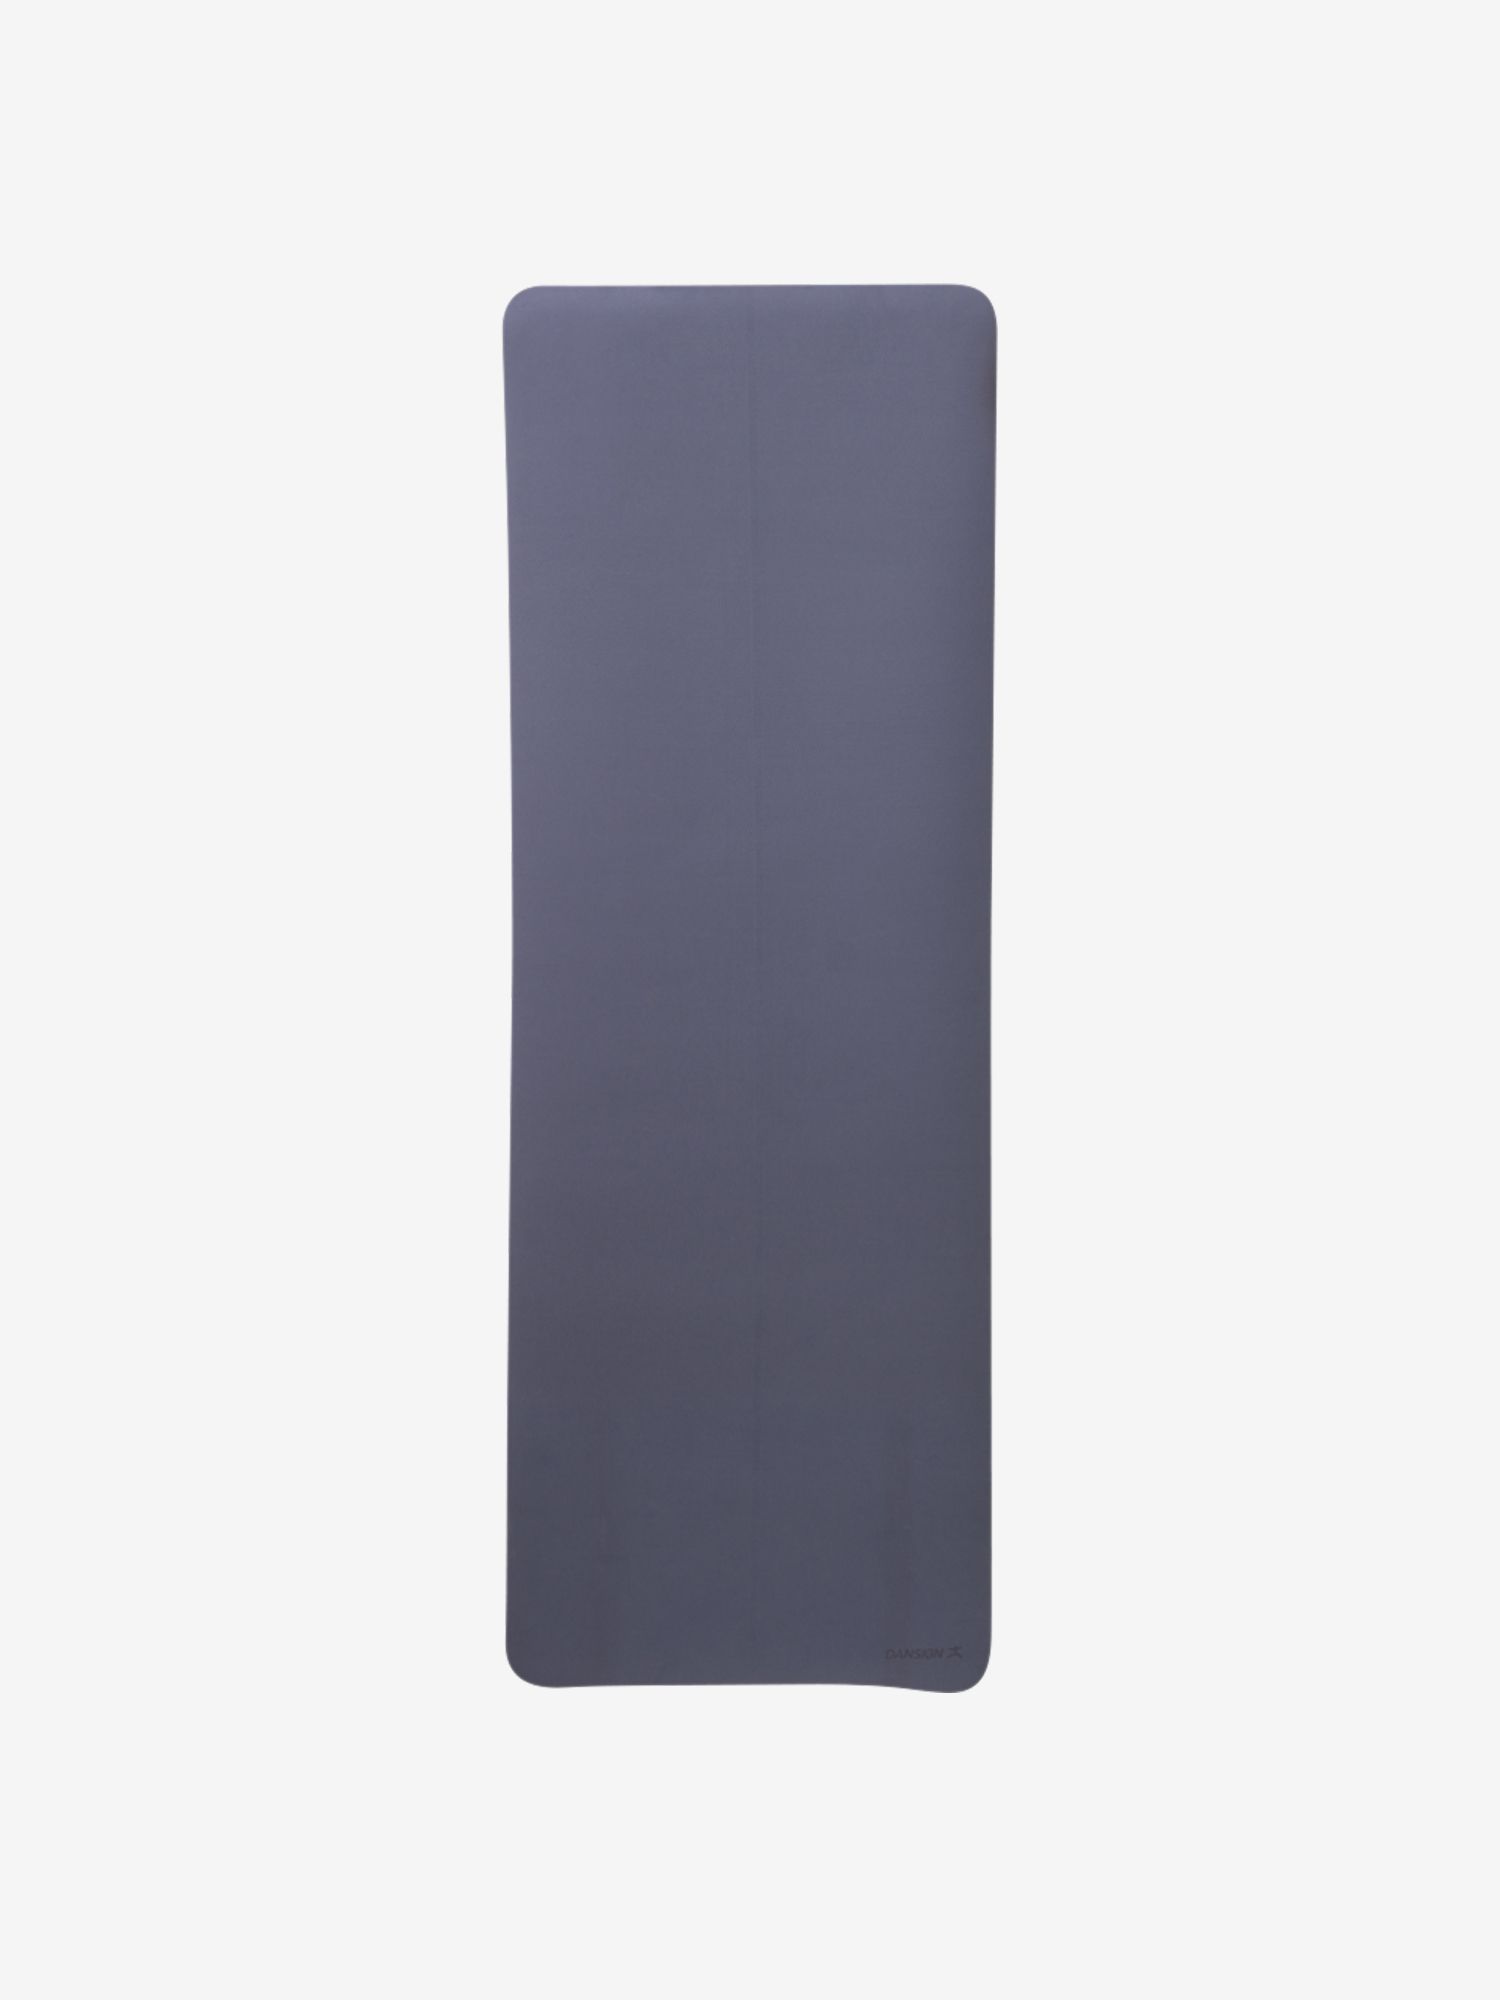 TWO COLOR YOGA MAT 5mm